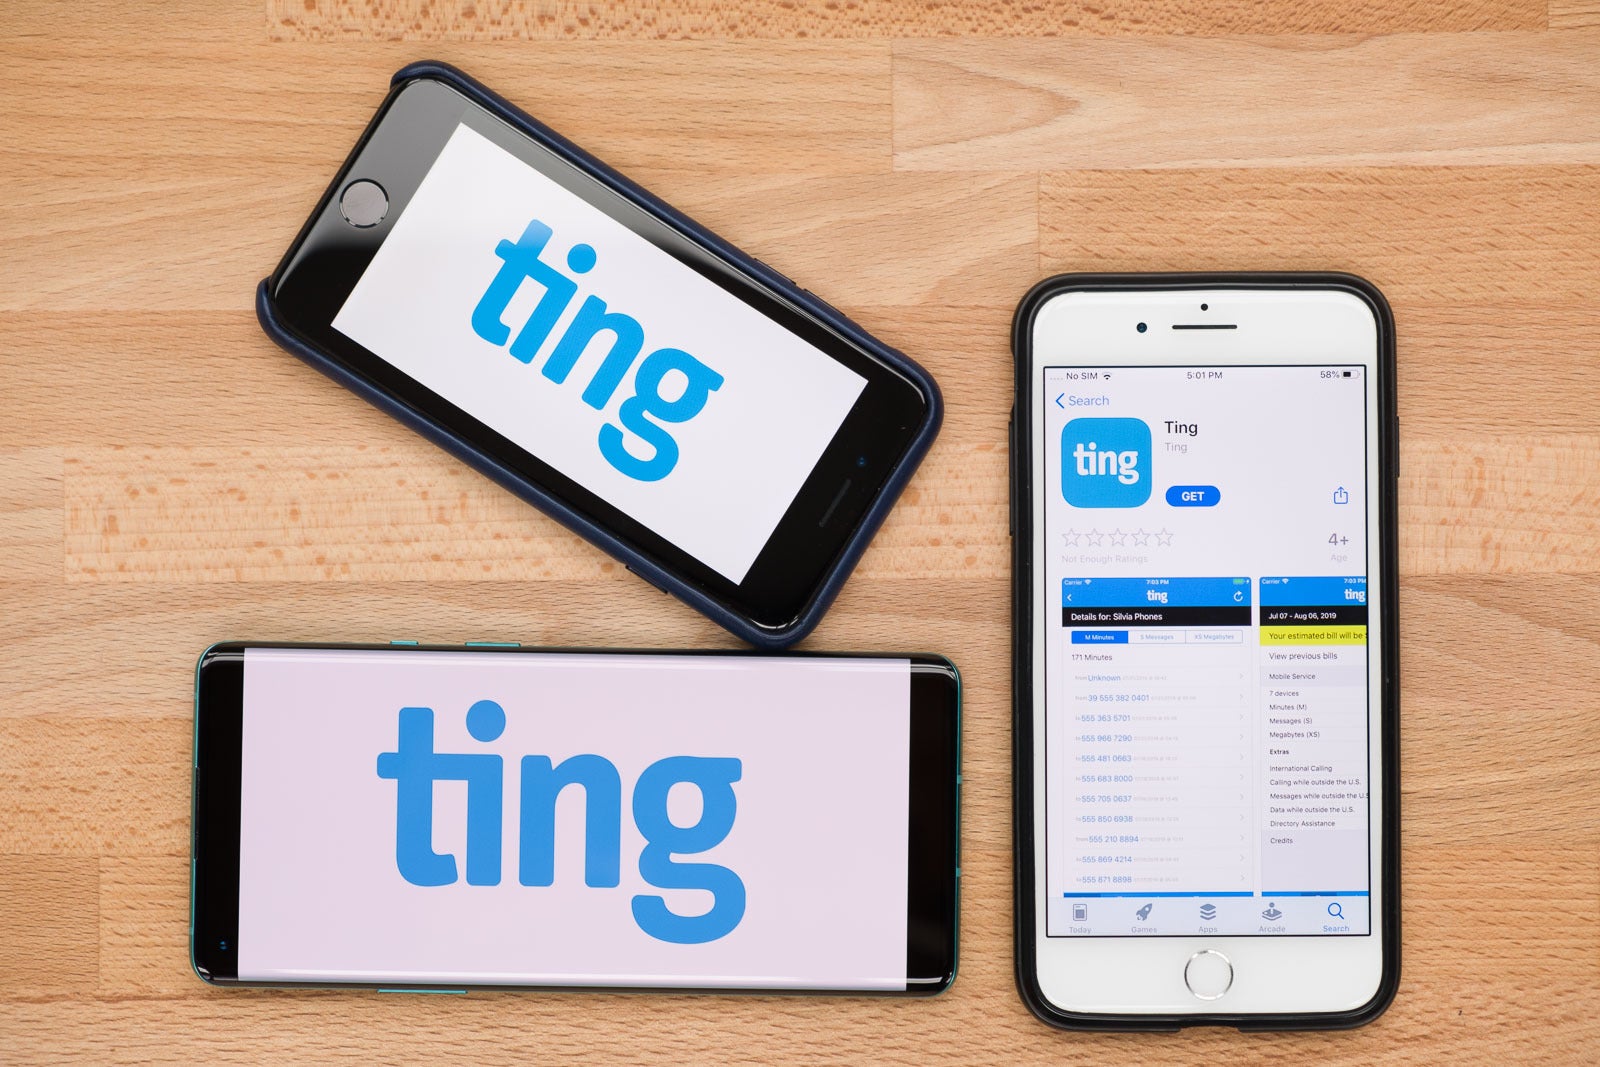 Ting Mobile wants to break you away from the shackles of big carriers, gives you $25 credit to try it